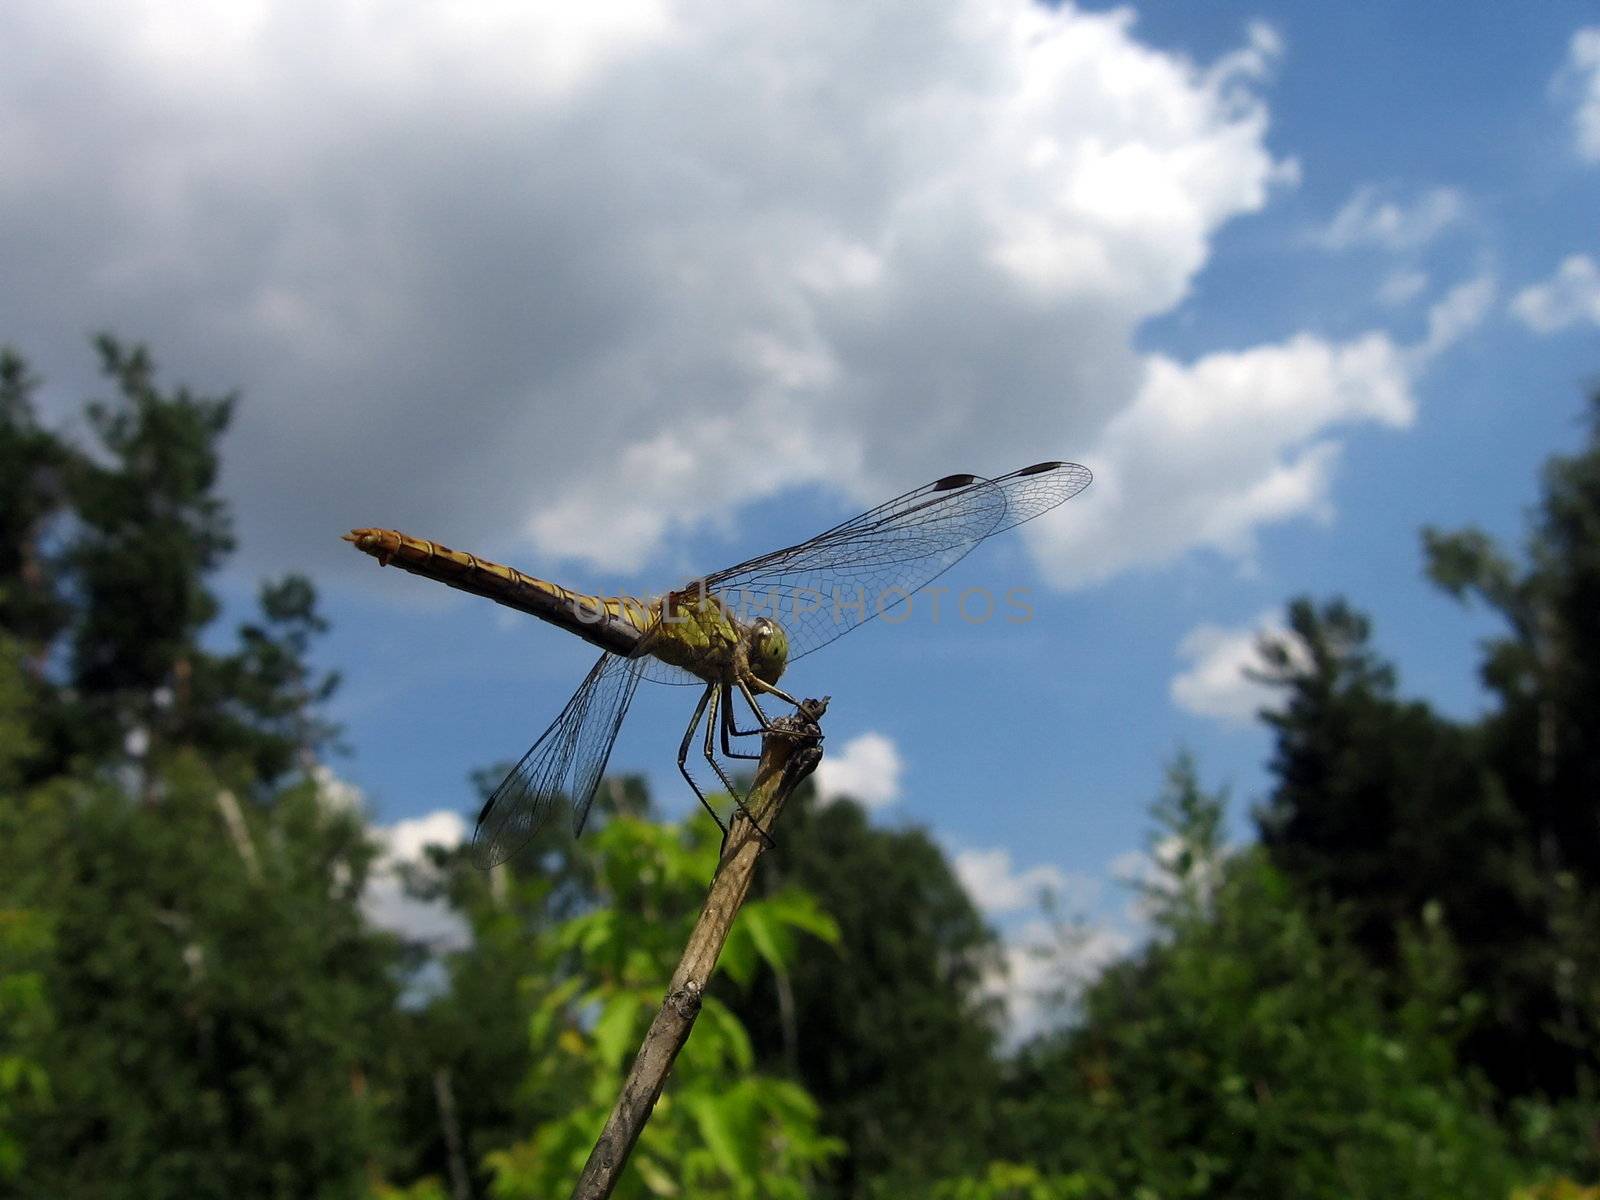 Dragonfly on the stalk by tomatto